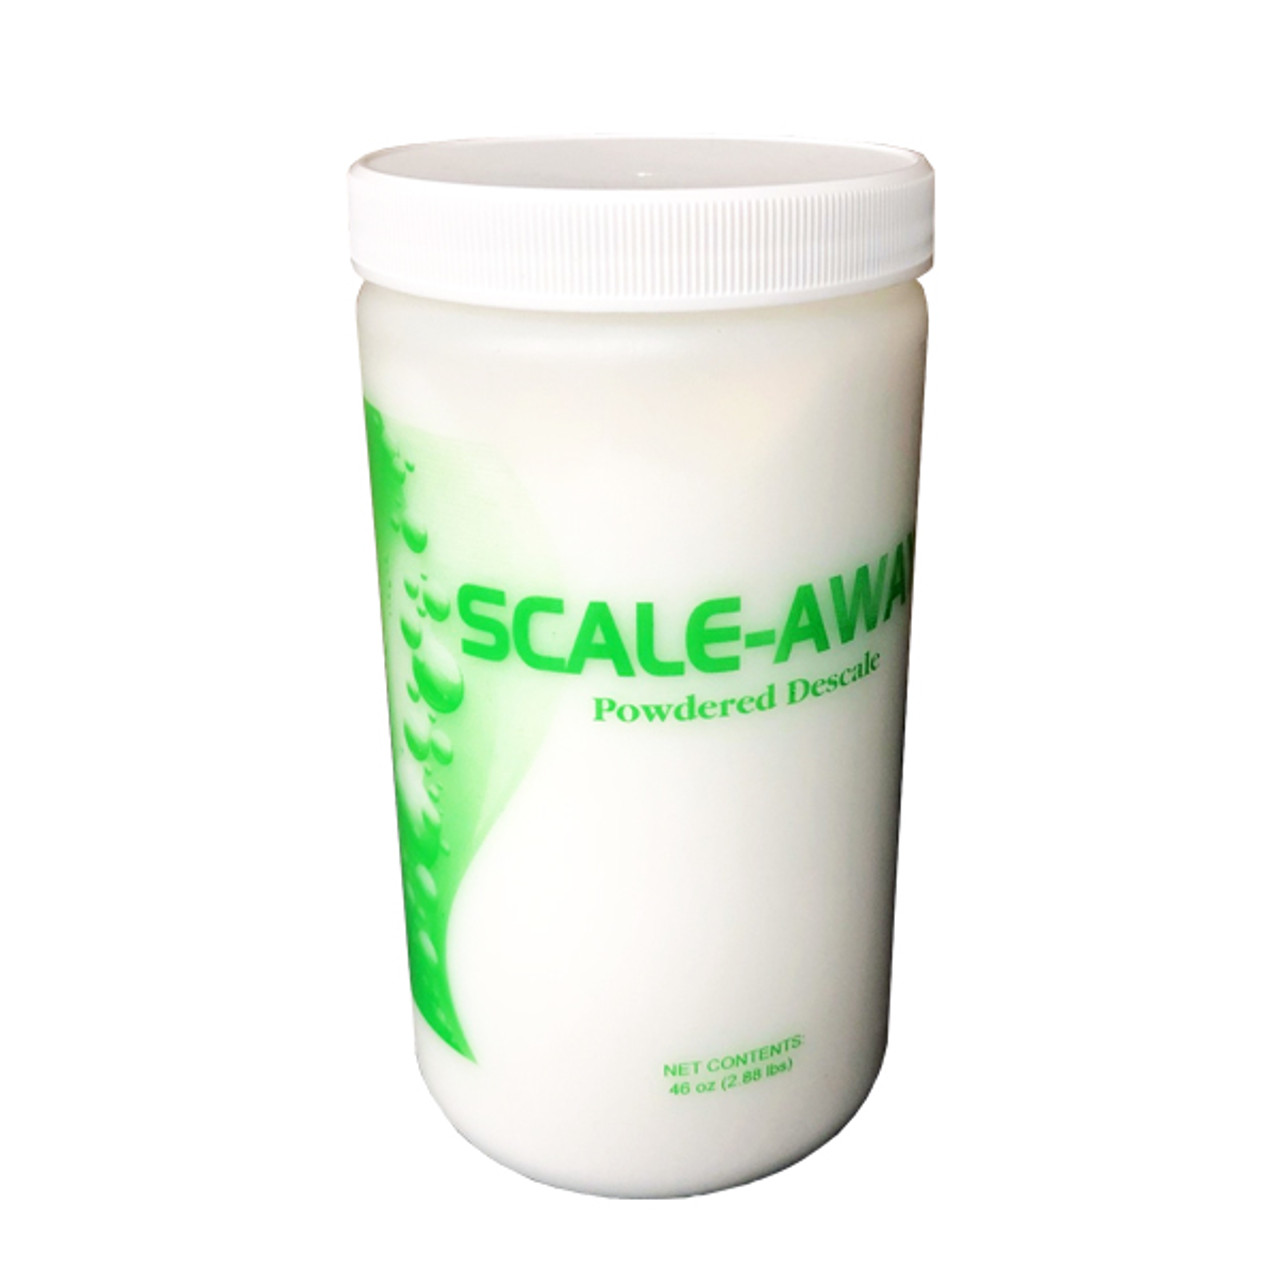 Scale-Away - Powdered Descale